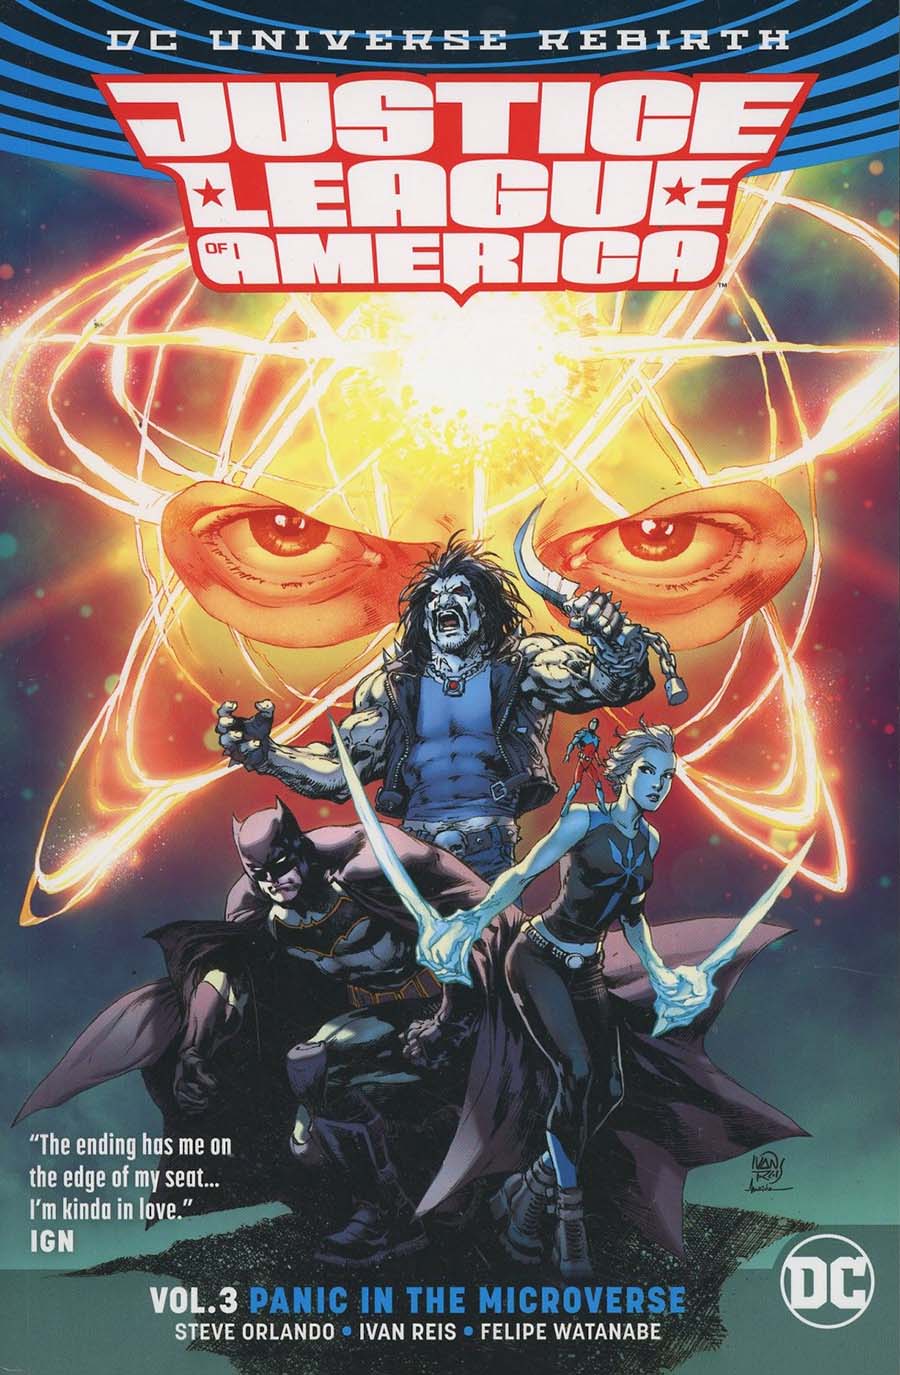 Justice League Of America (Rebirth) Vol 3 Panic In The Microverse TP